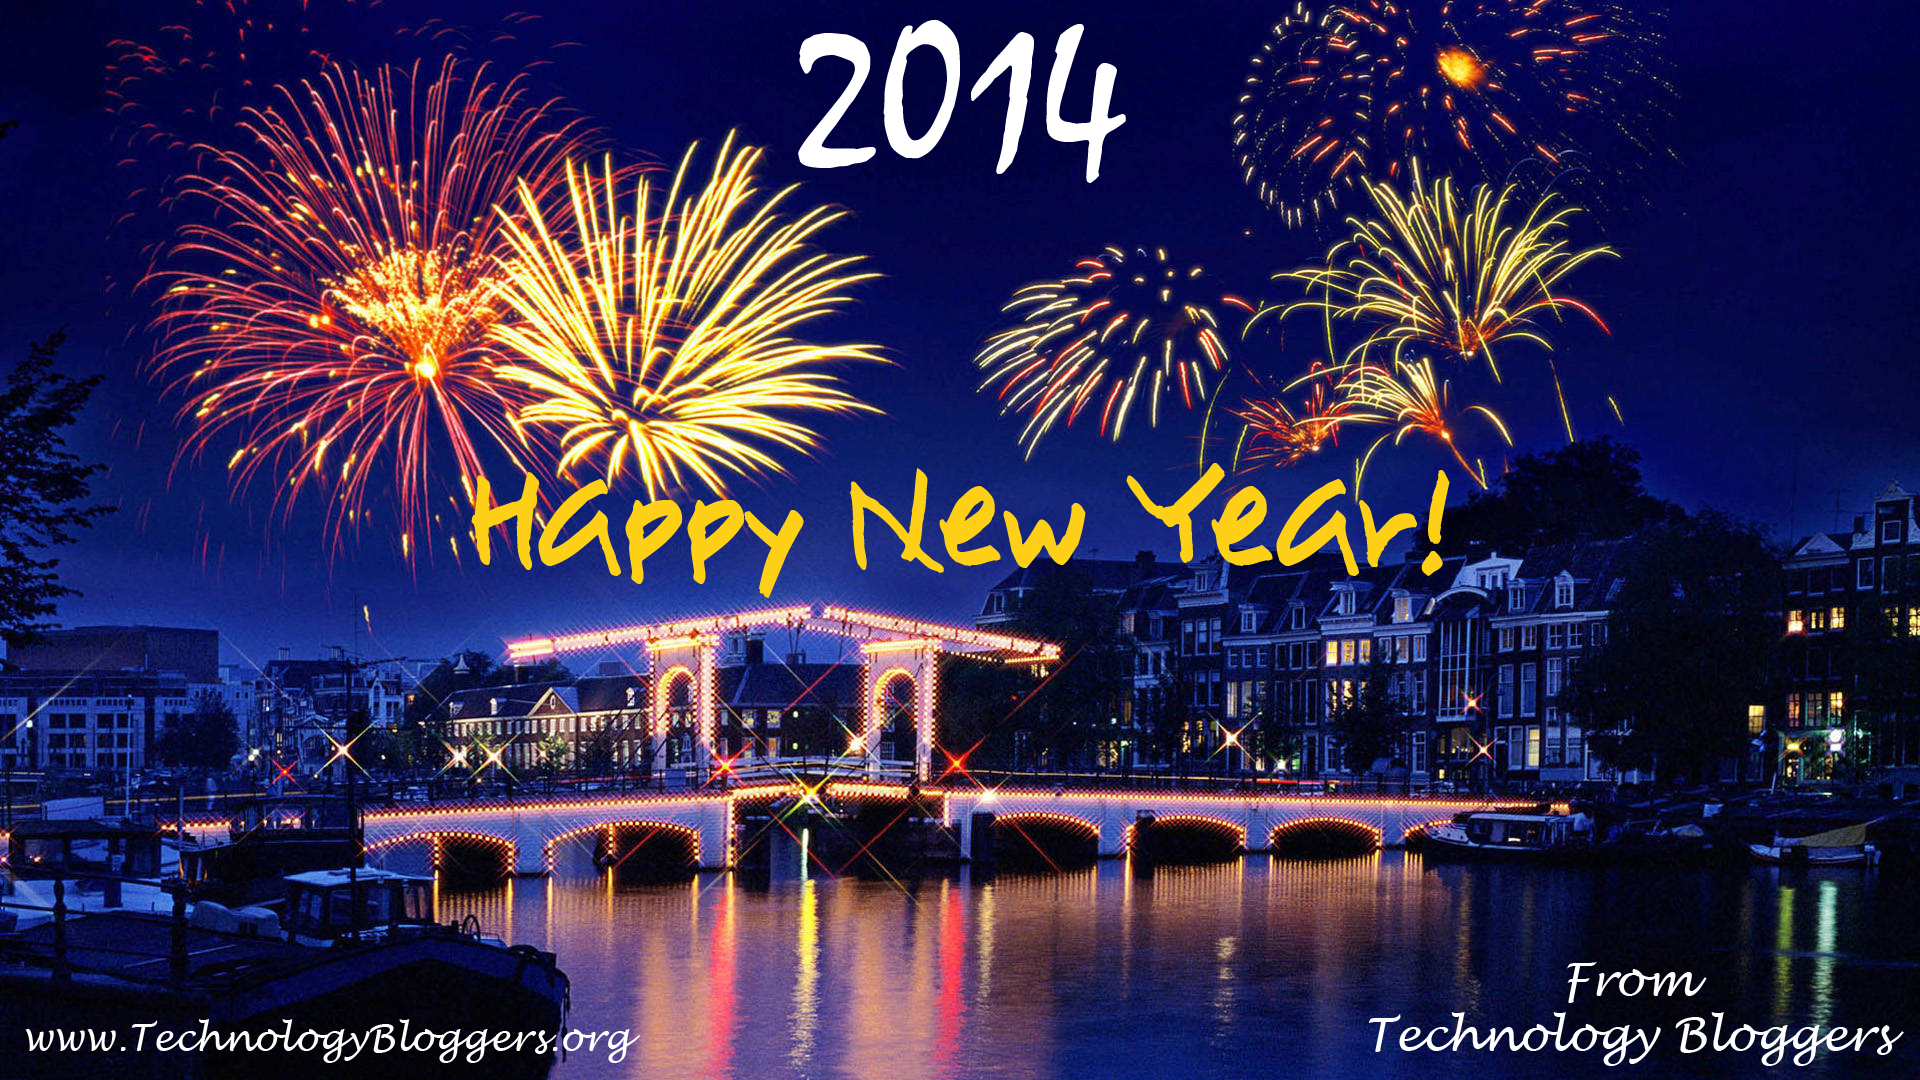 Happy New Year 2014! | Technology Bloggers